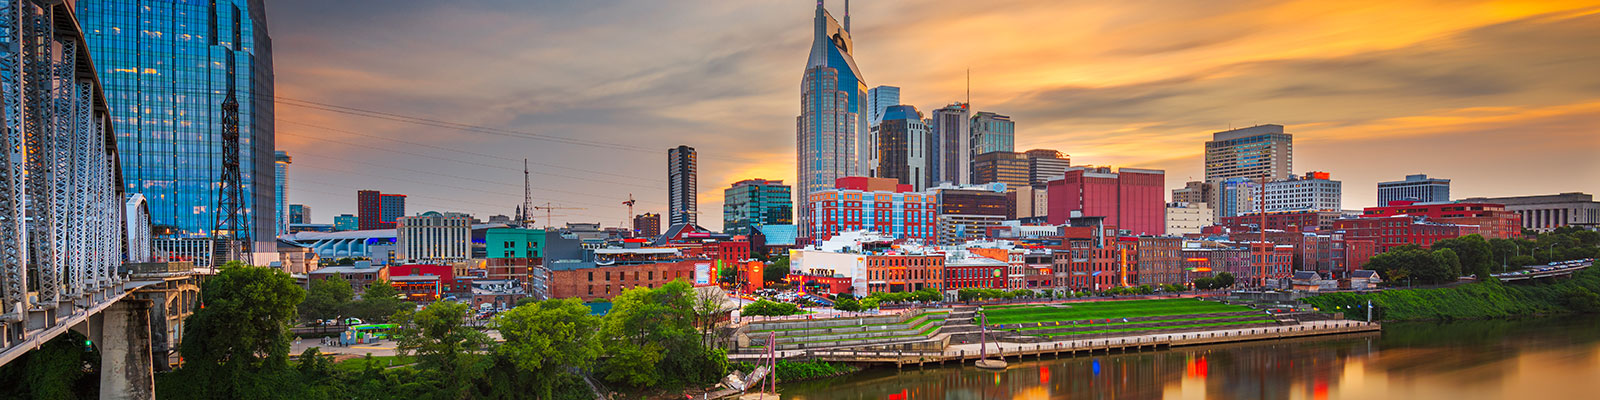 picture-of-nashville-tennessee-city-skyline-at-sunset-where-apco-next-generation-9-1-1-event-took-place